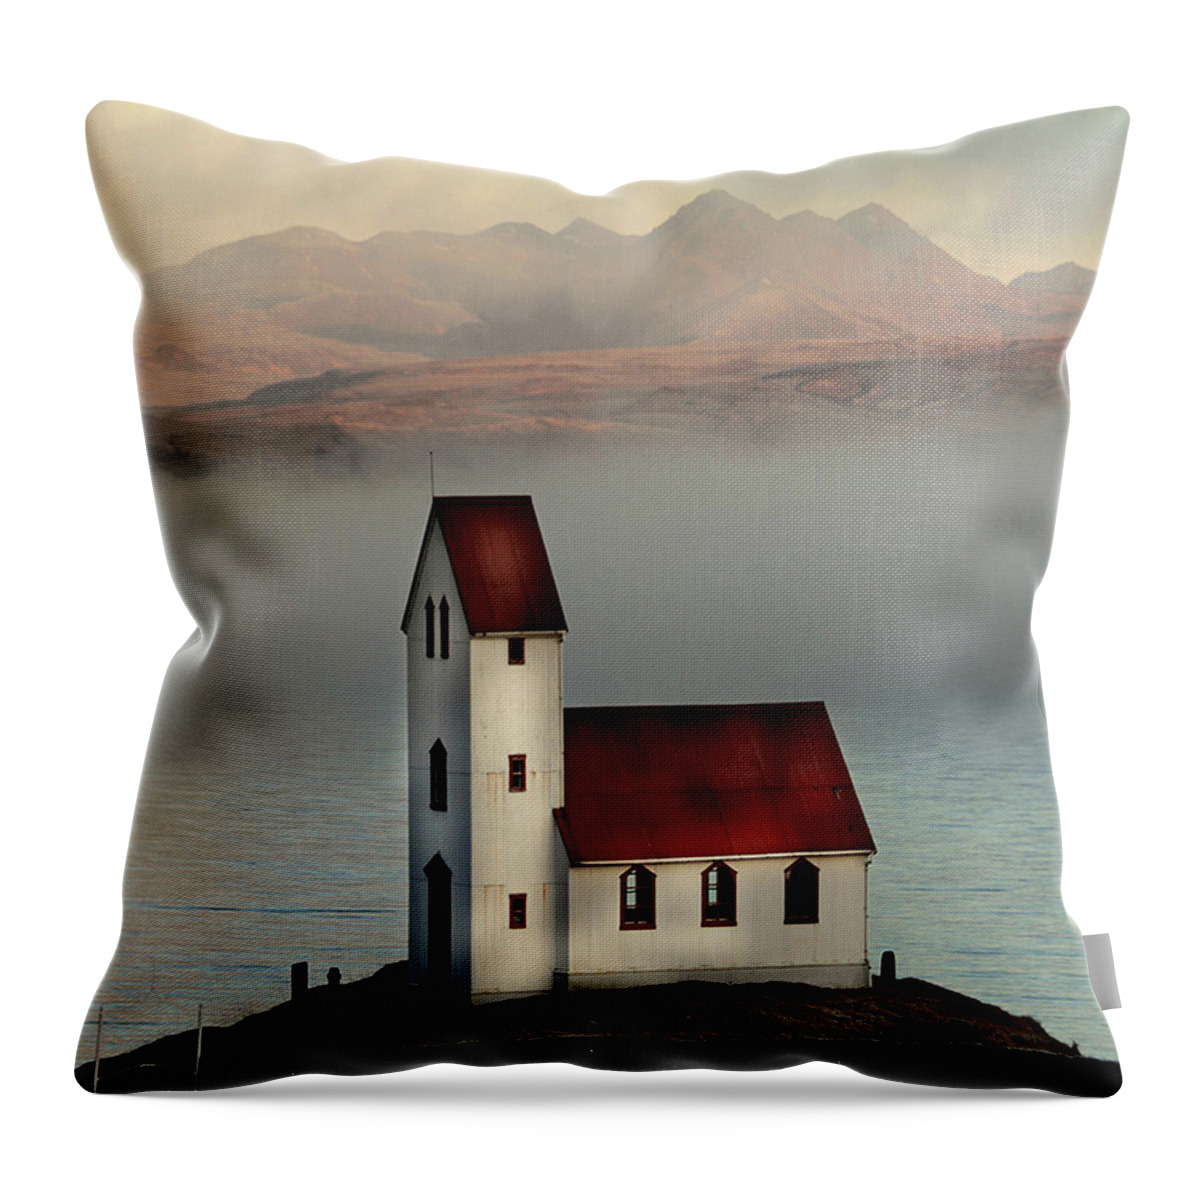 Standing Water Throw Pillow featuring the photograph Old Church by Sverrir Thorolfsson Iceland